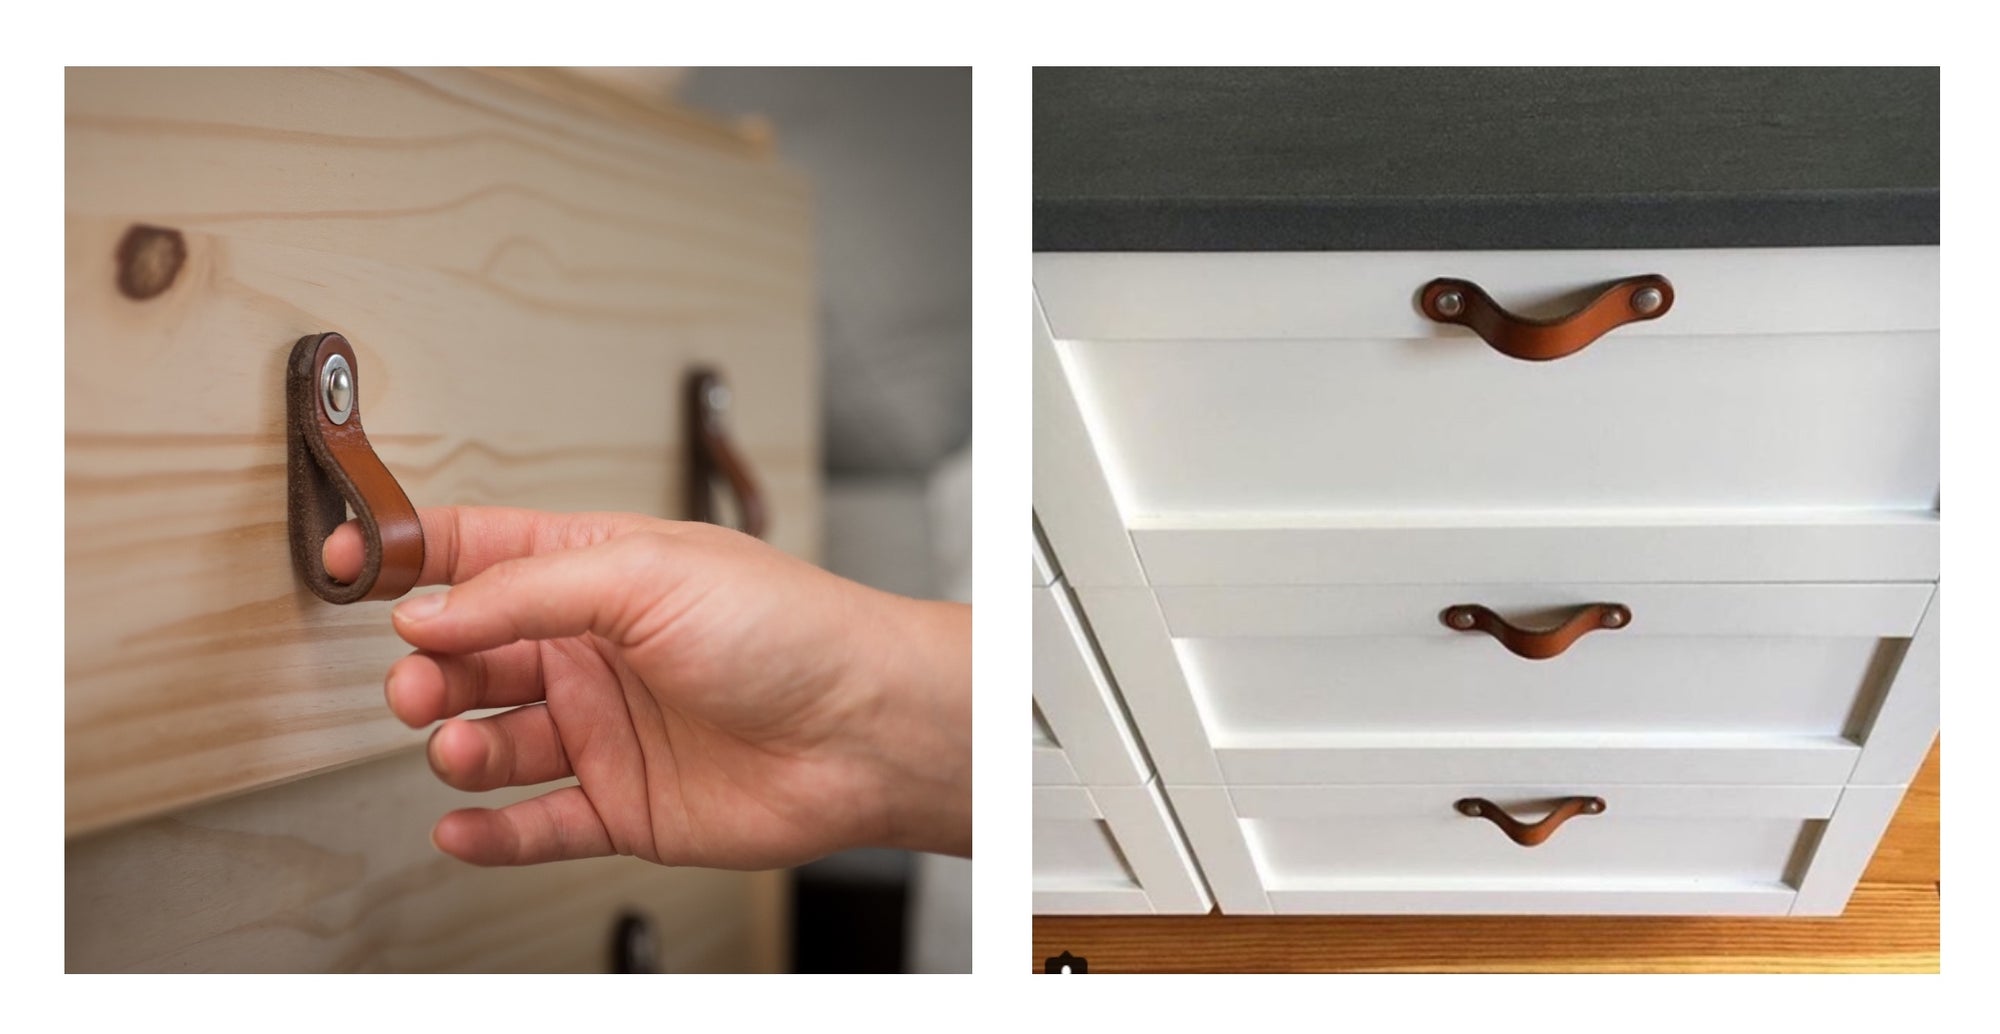 Install the Hawthorne "Flat" as a Leather Handle Instead of a Knob